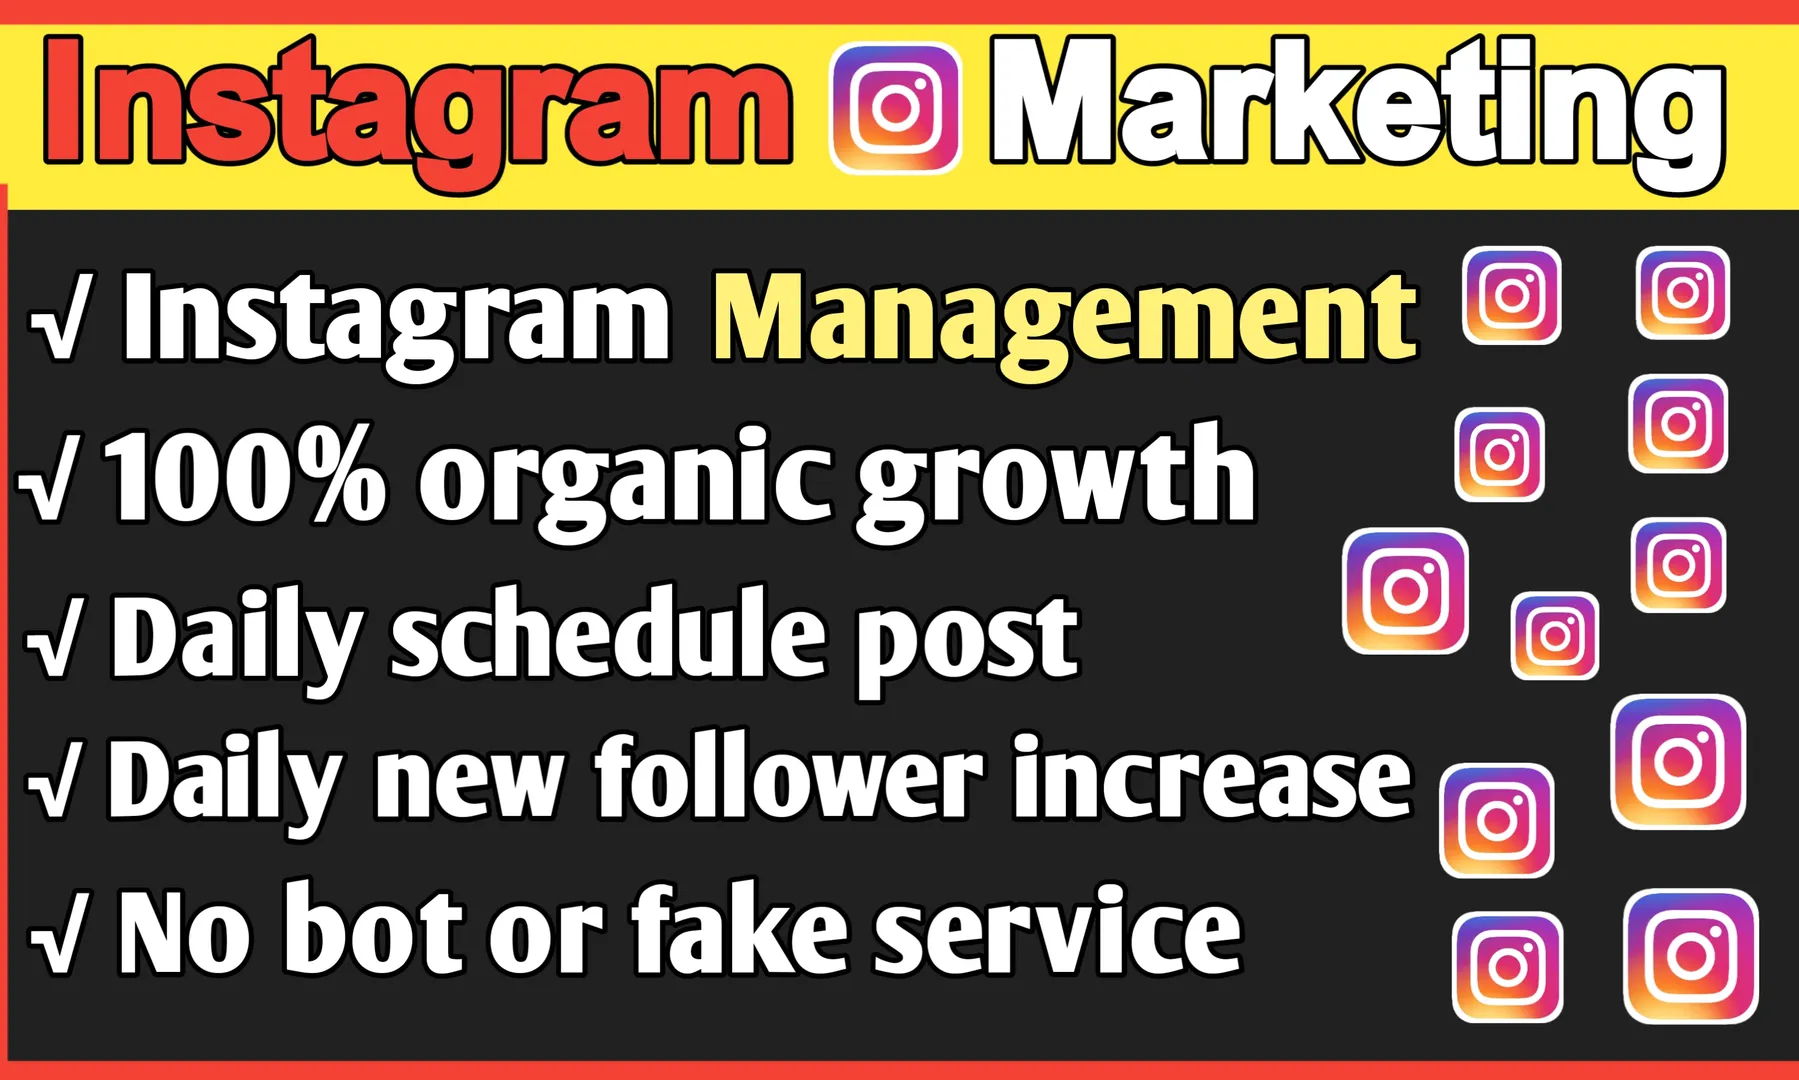 Hi dear,

Are you looking for someone to manage your Instagram for organic growth and promotion?

Or you don't have time to manage or marketing an Instagram account.  Don't worry

Then you have come to the right place.

As an expert Instagram manager, I will try my best to bring organic real active followers to your account.  And it will be 100% organic growth.

What you will get from me: 
100% Organic increase follower
Best hashtag Research
Include Targeted Audience
Per day post according to instruction
Properly brand awareness
Unfollow those who don't engage back
Optimize your post 
Follow/ unfollow method
My specialty: 
100% real & clean Work with honestly
I will never give fake service
Engage real audience 
Best service provide
Friendly communication
Also website link promote

Order here:
Fiverr Link: https://www.fiverr.com/s/rNx71b